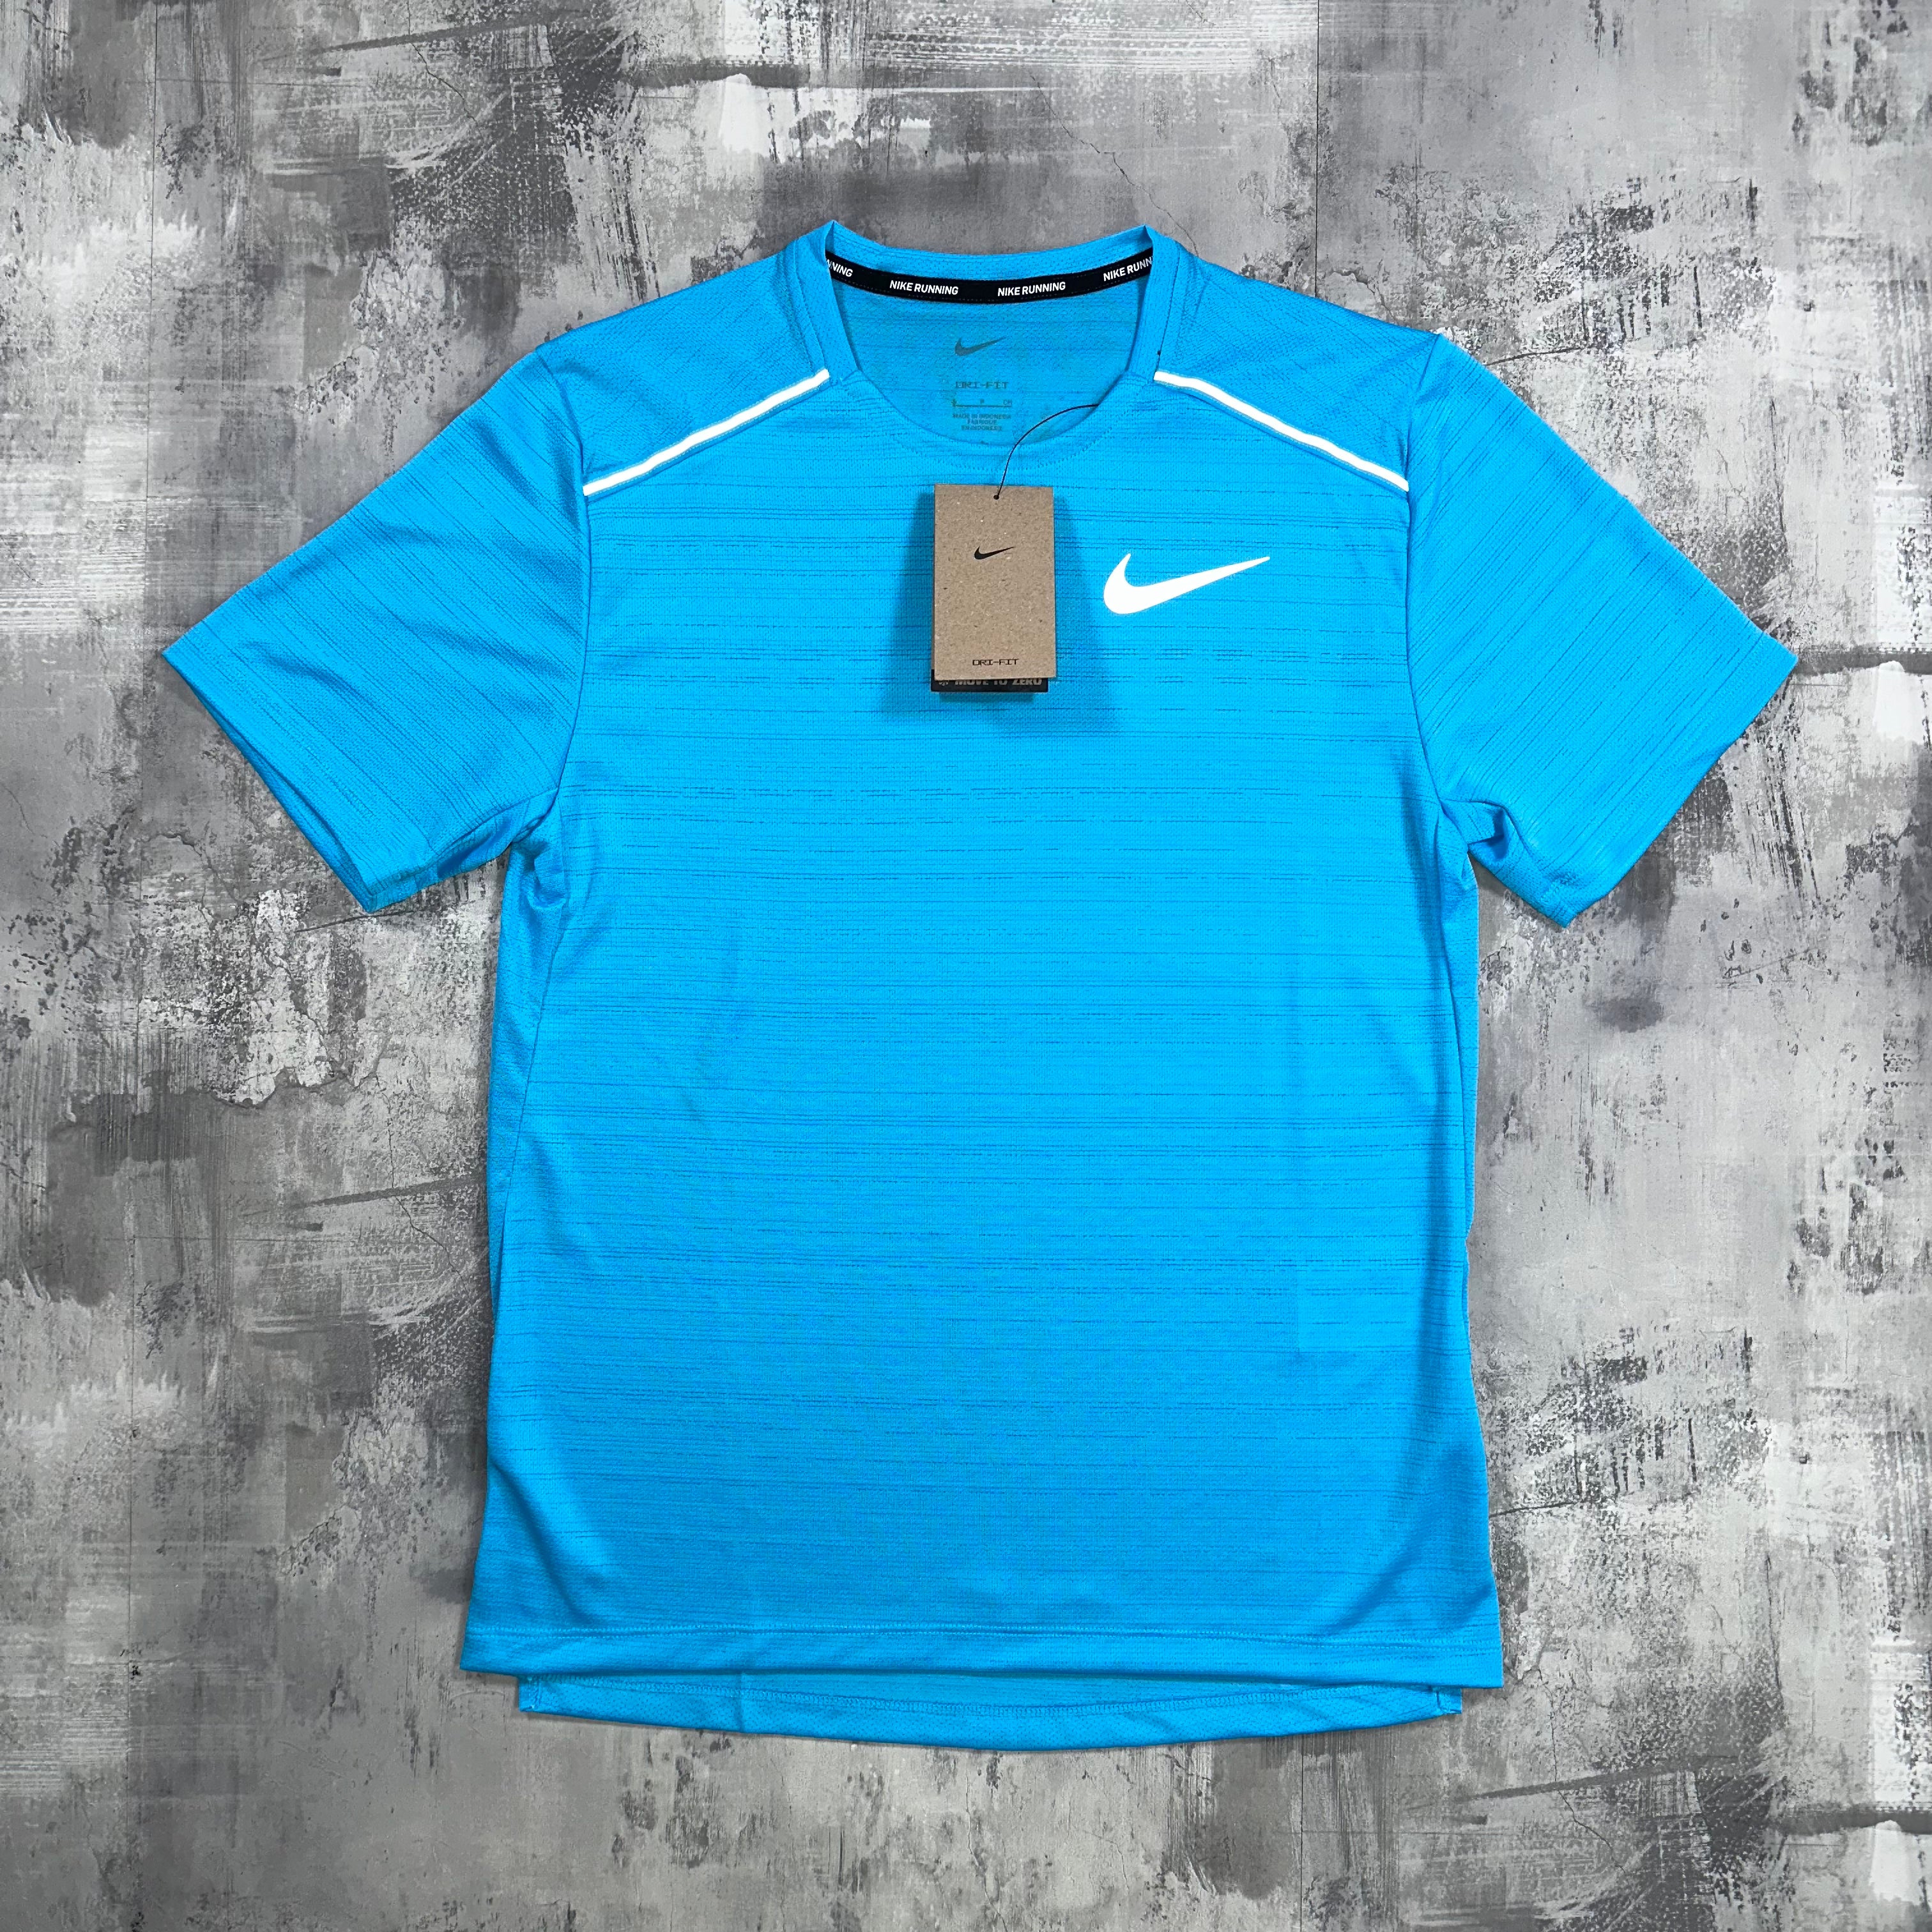 The Nike Miler T-Shirt In Sky Blue. In this angle, you can see the Nike swoosh from the front. 